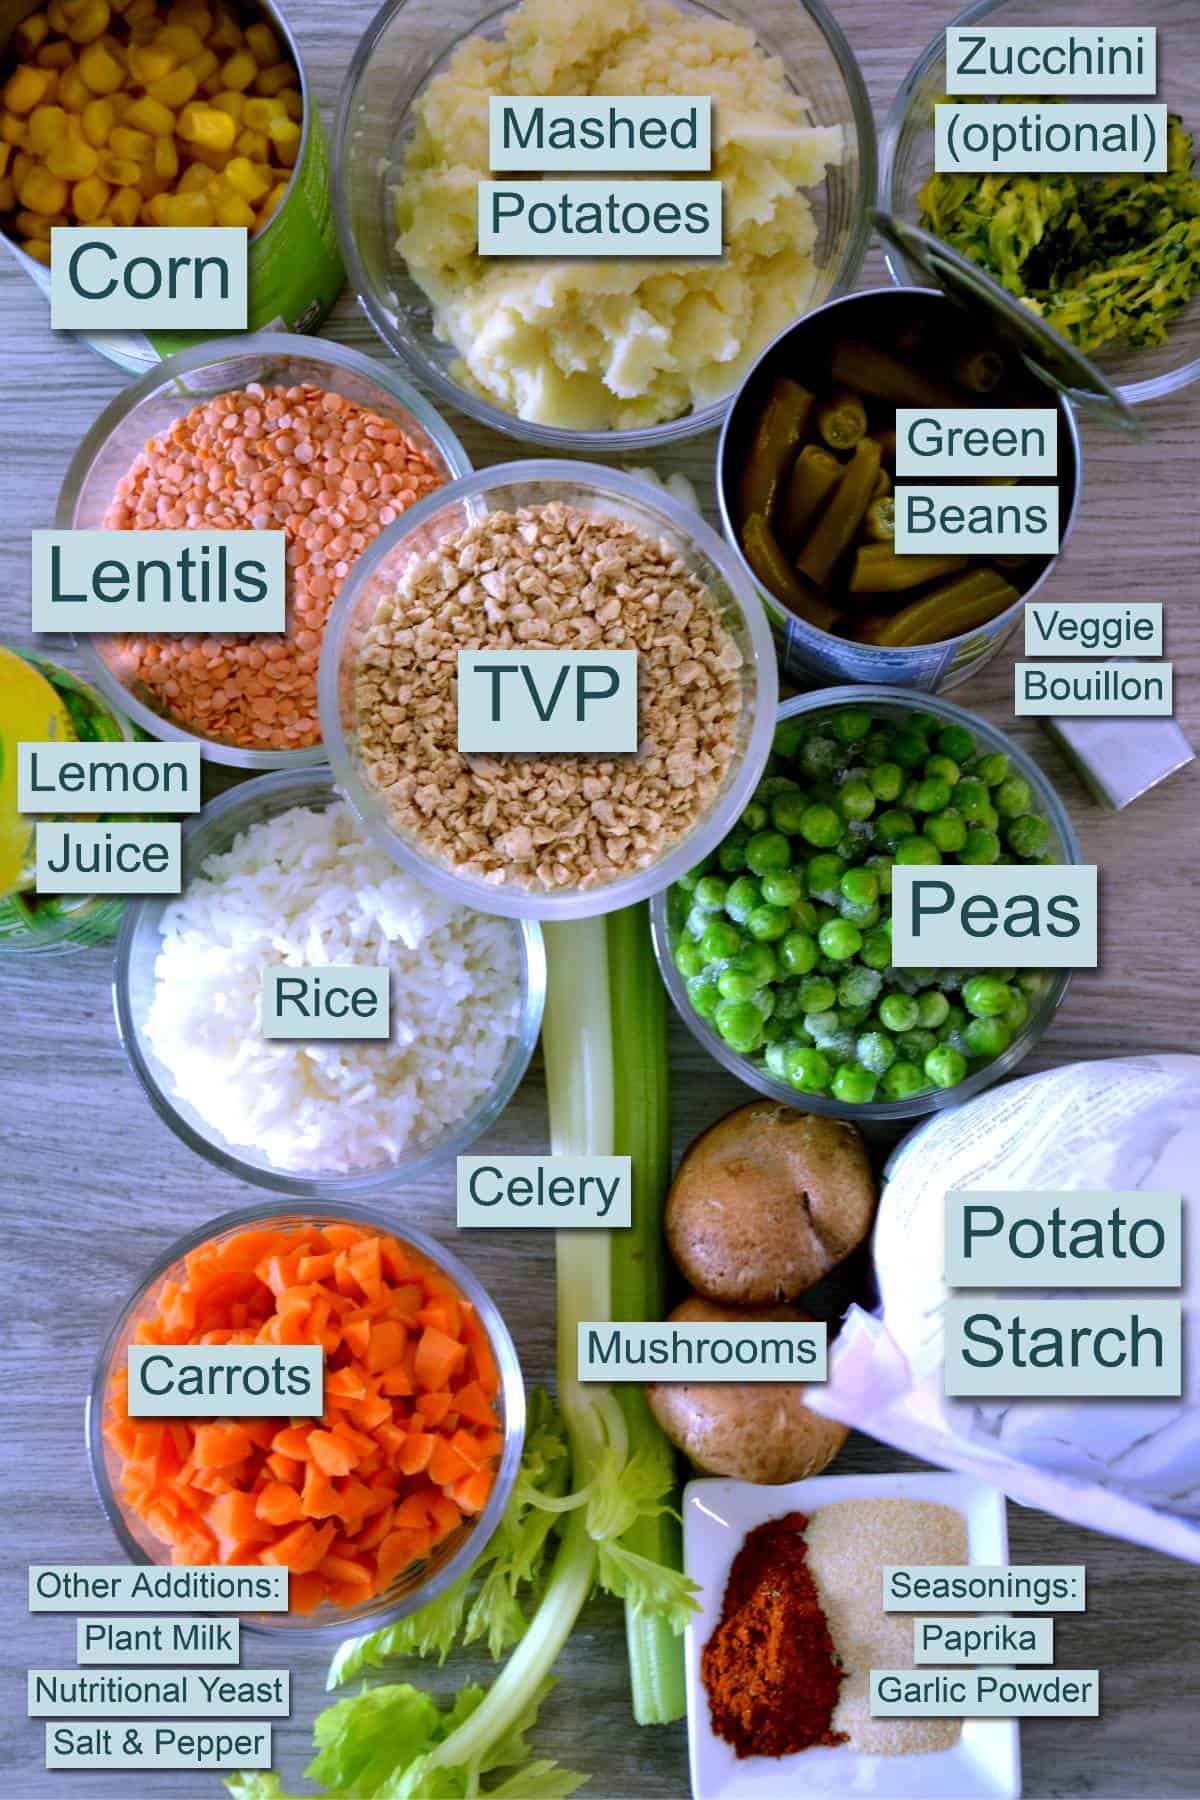 ingredients for shepherds pie with text labels.